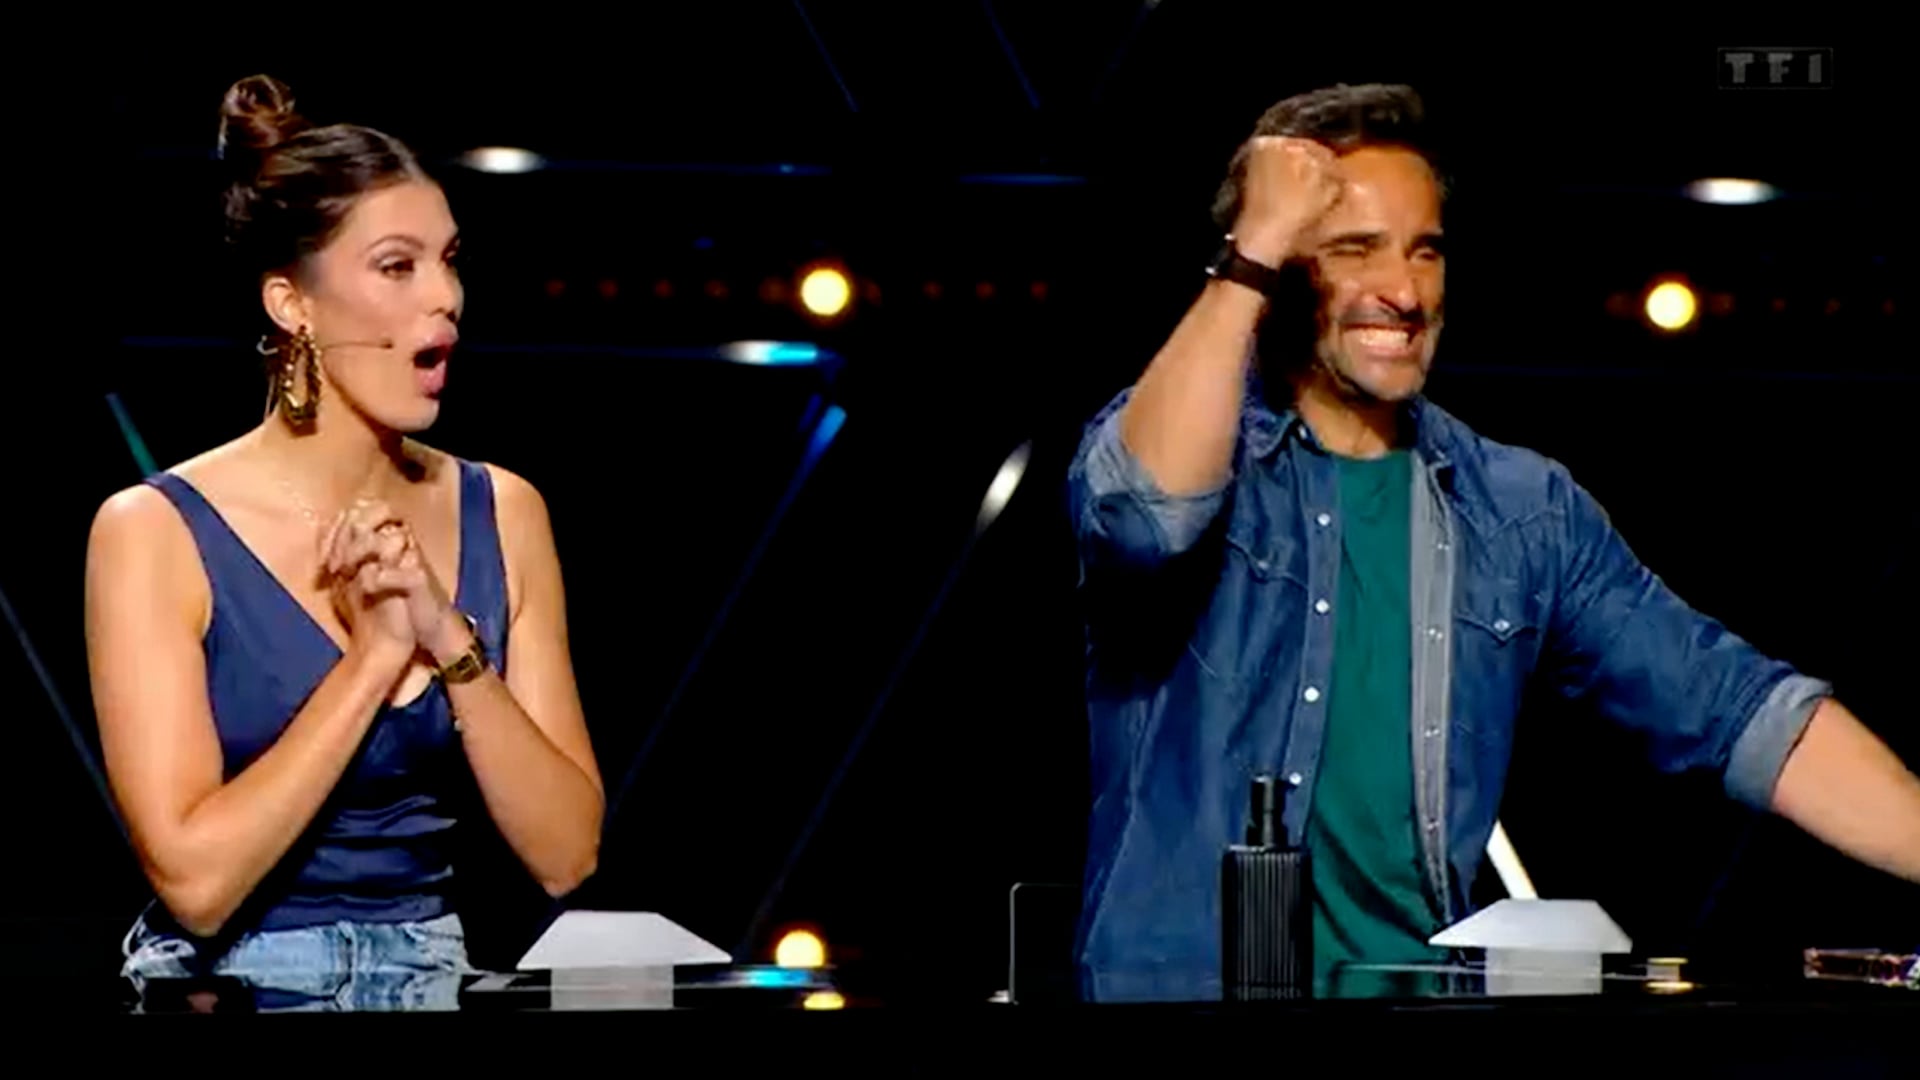 TF1 - Game of Talents - August 2021